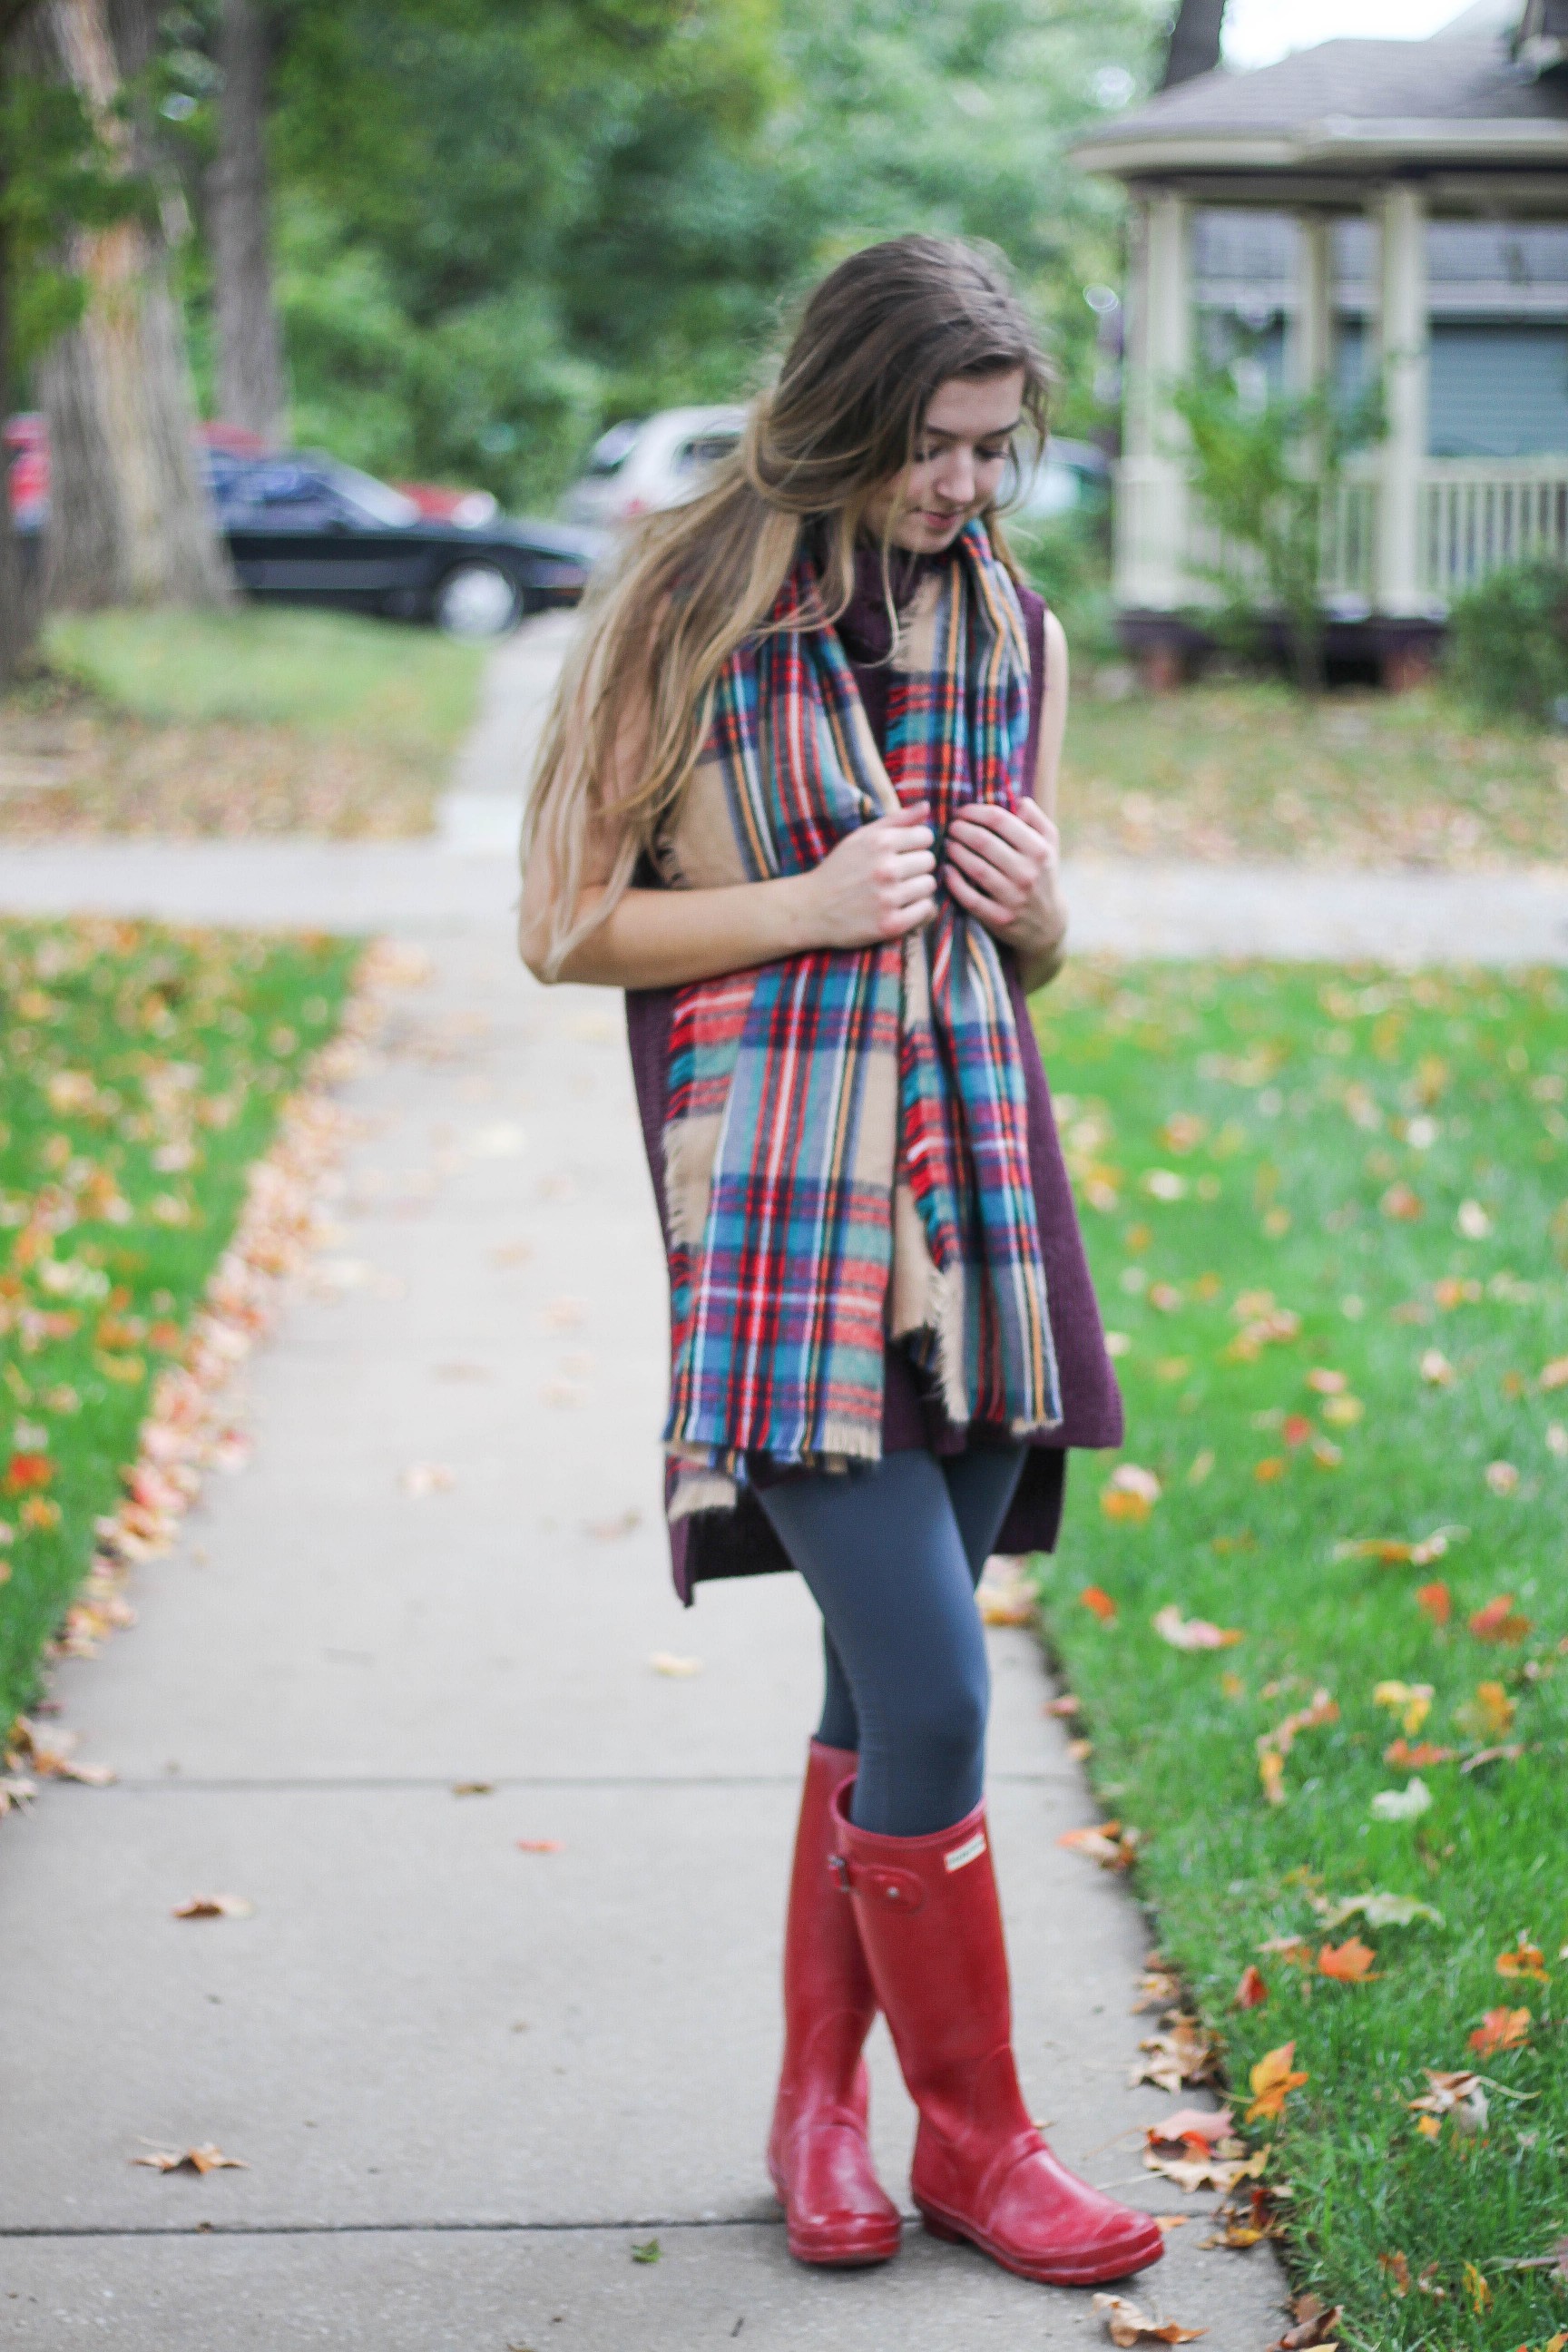 Barbour coats and blanket scarves are perfect for fall, see it on the blog daily dose of charm by lauren lindmark dailydoseofcharm.com